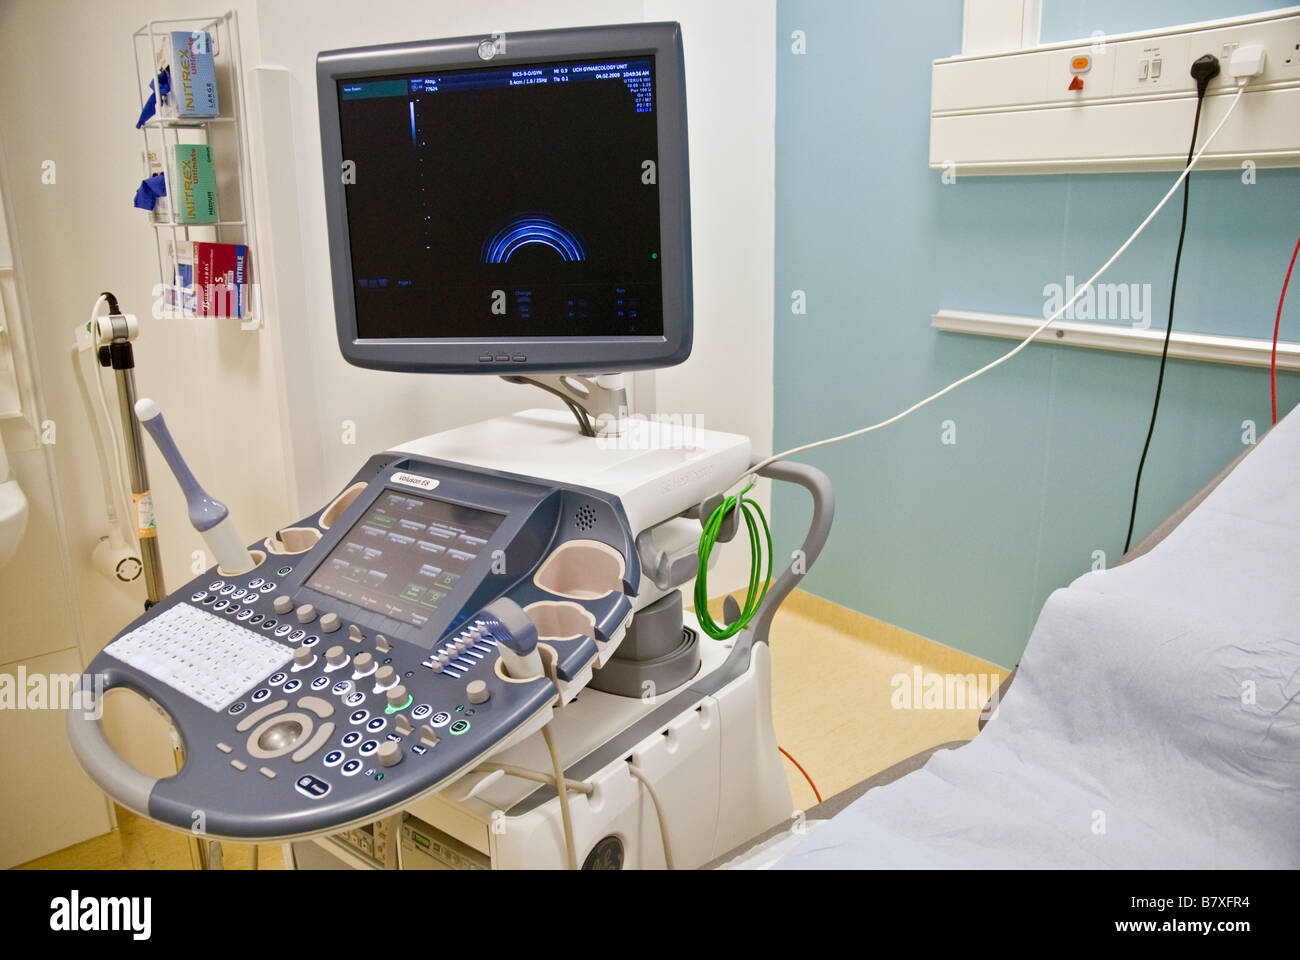 UCL HOSPITAL  BIRTH SCAN EQUIPMENT AND TEST ROOM Stock Photo